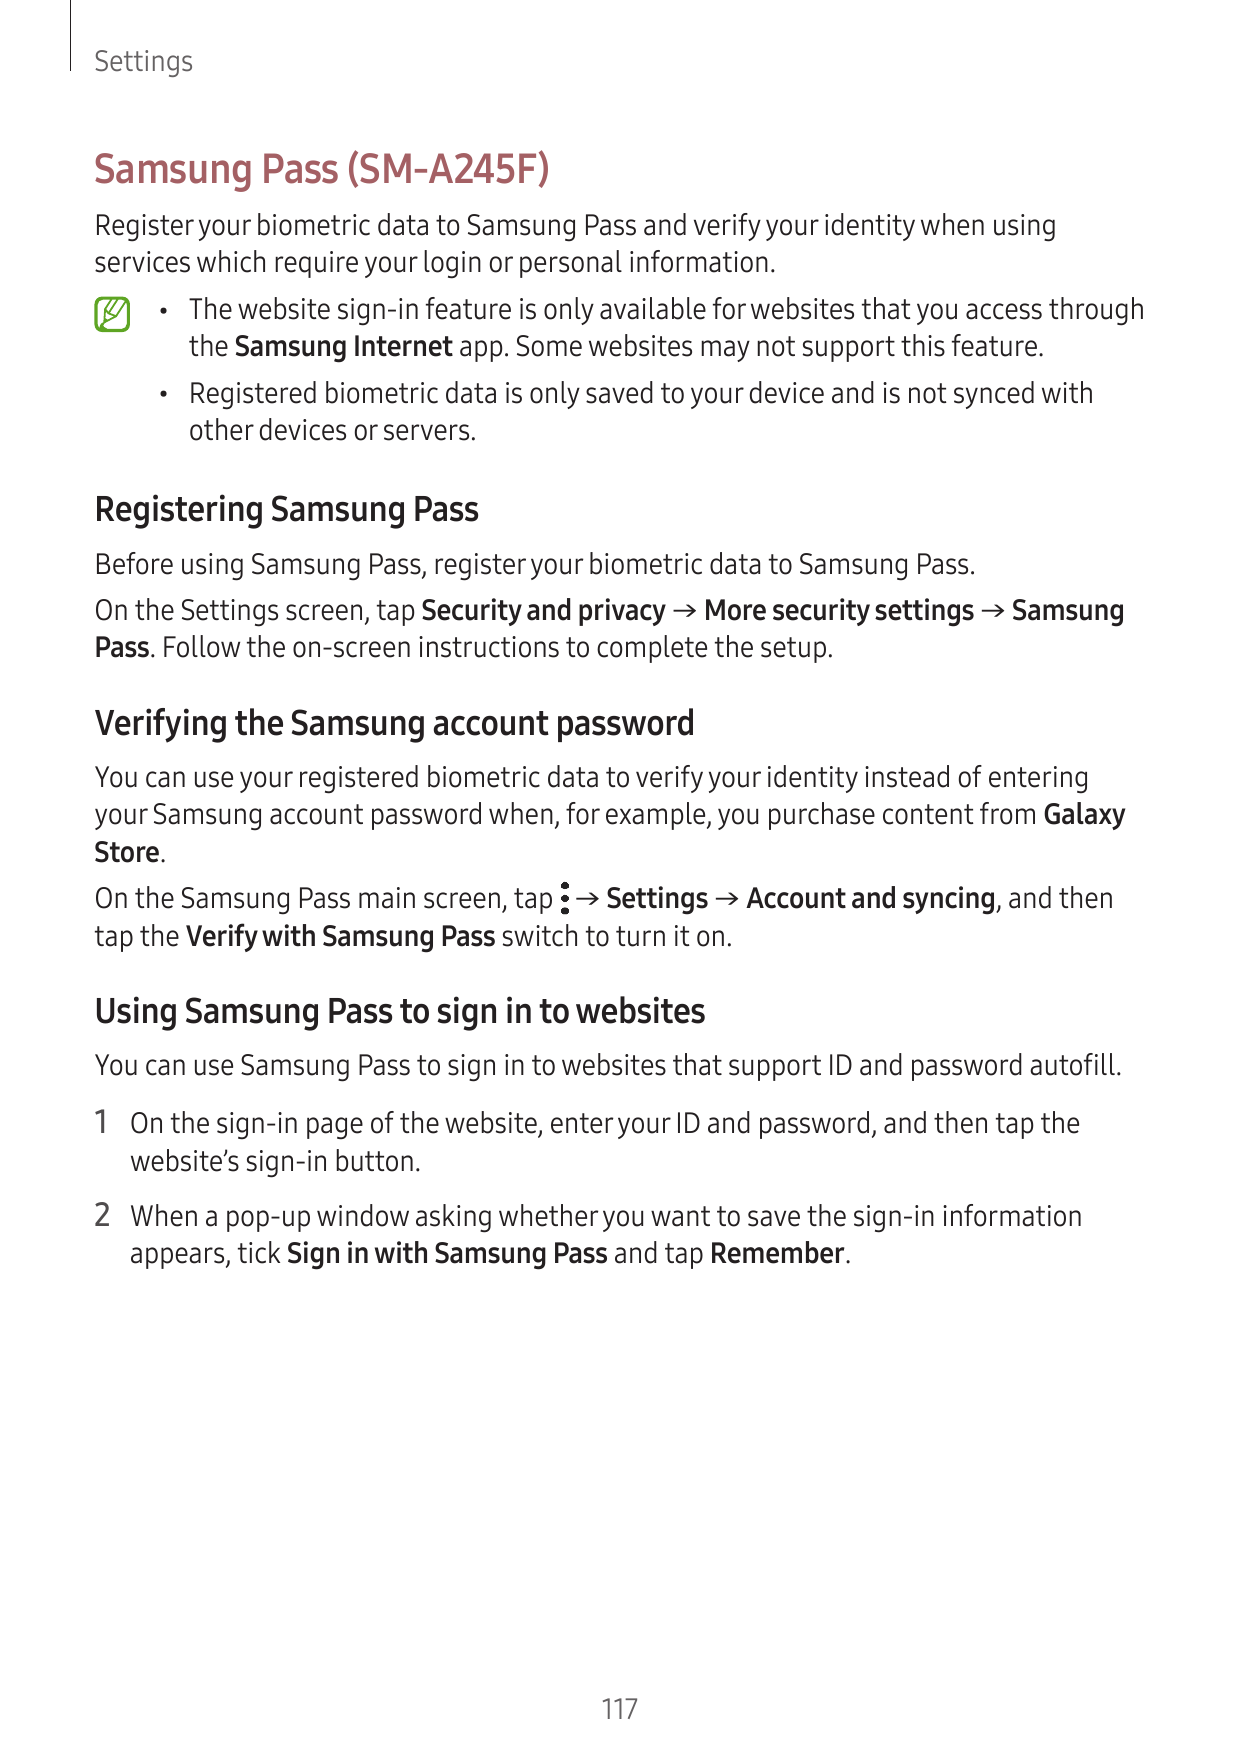 SettingsSamsung Pass (SM-A245F)Register your biometric data to Samsung Pass and verify your identity when usingservices which re